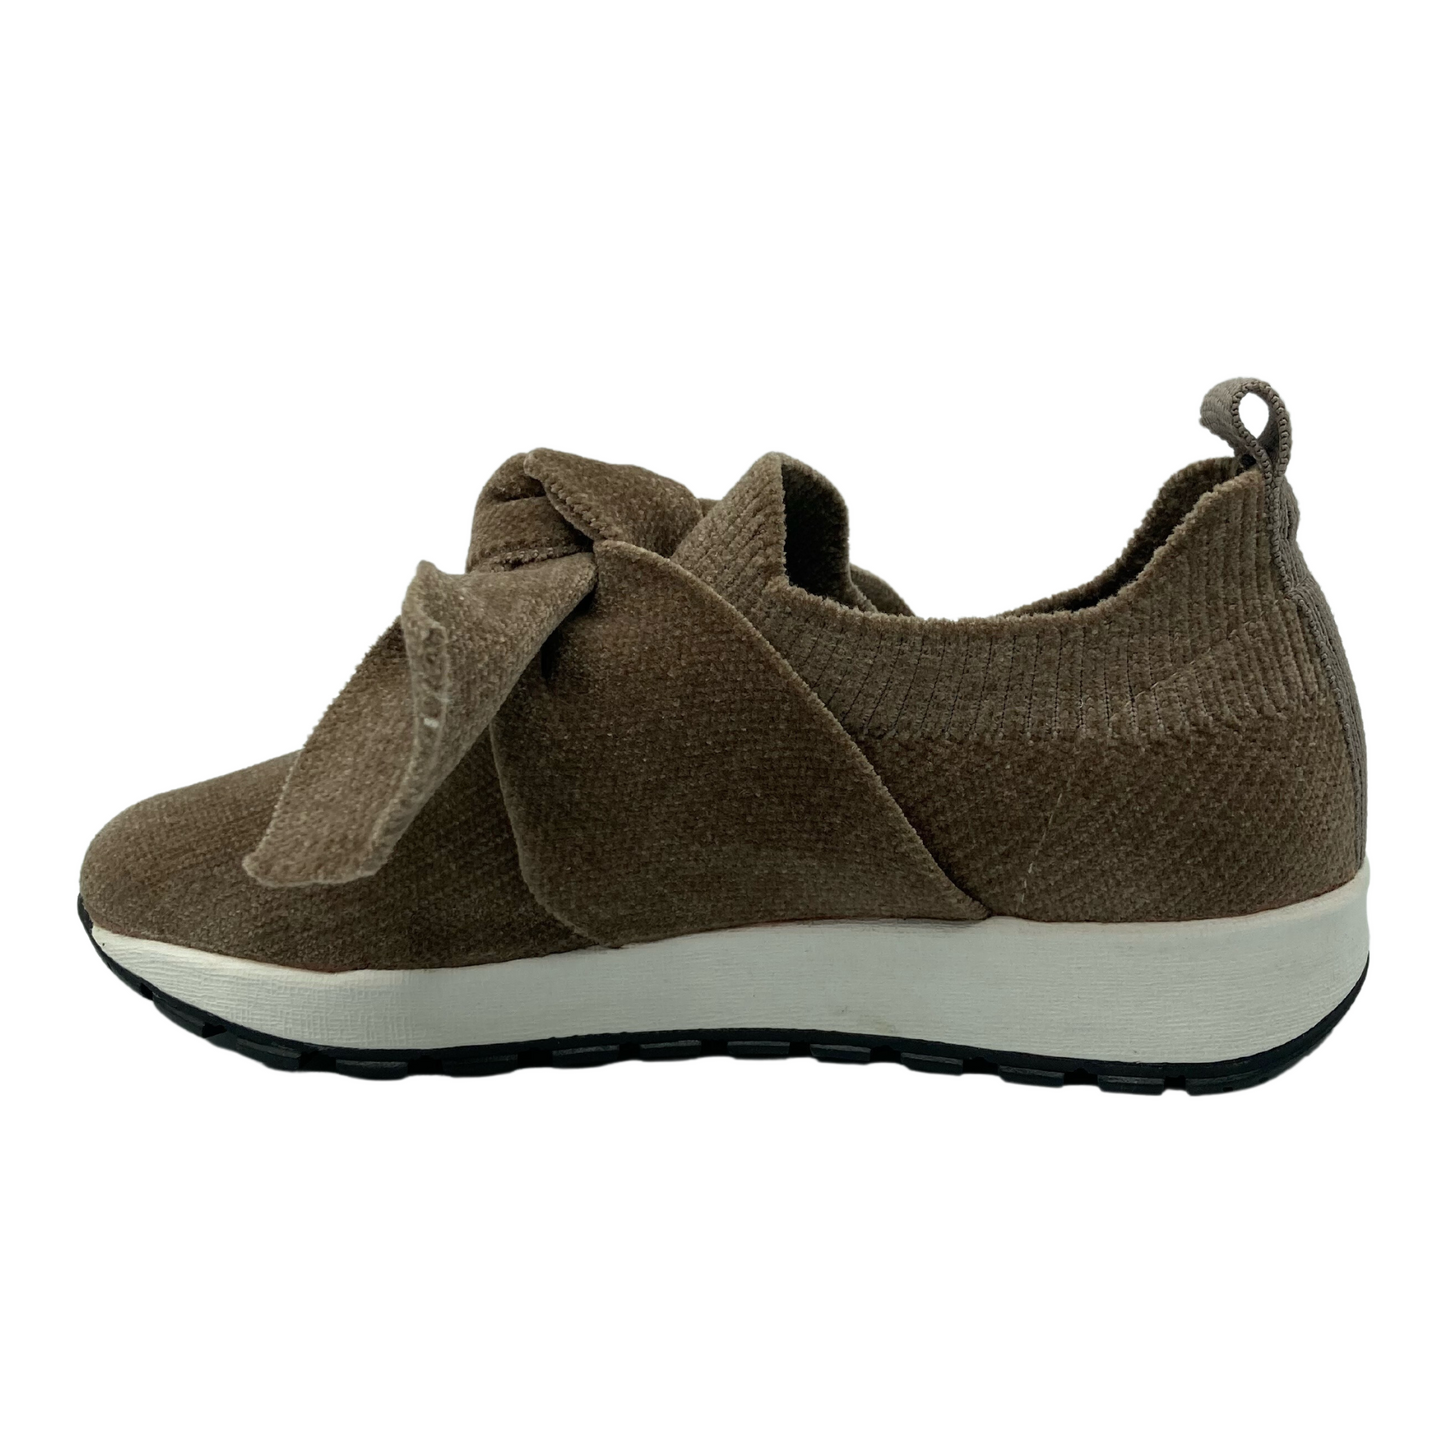 Left facing view of brown knit sneaker with thick white rubber outsole and large bow detail on upper